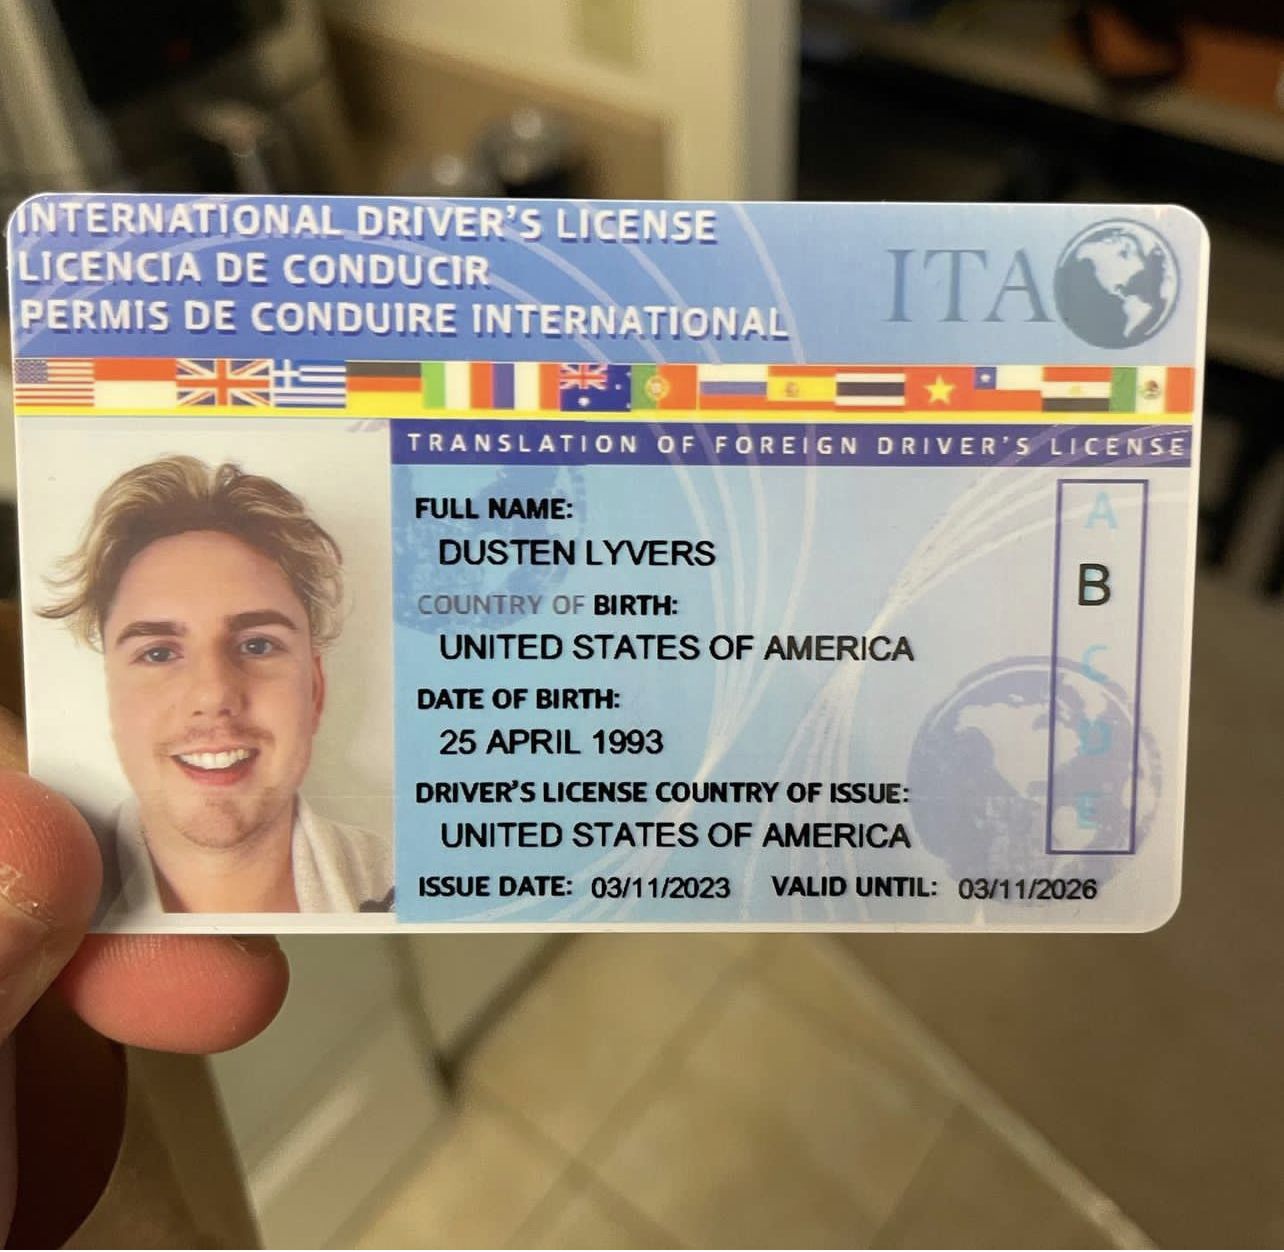 International driver's license in Germany